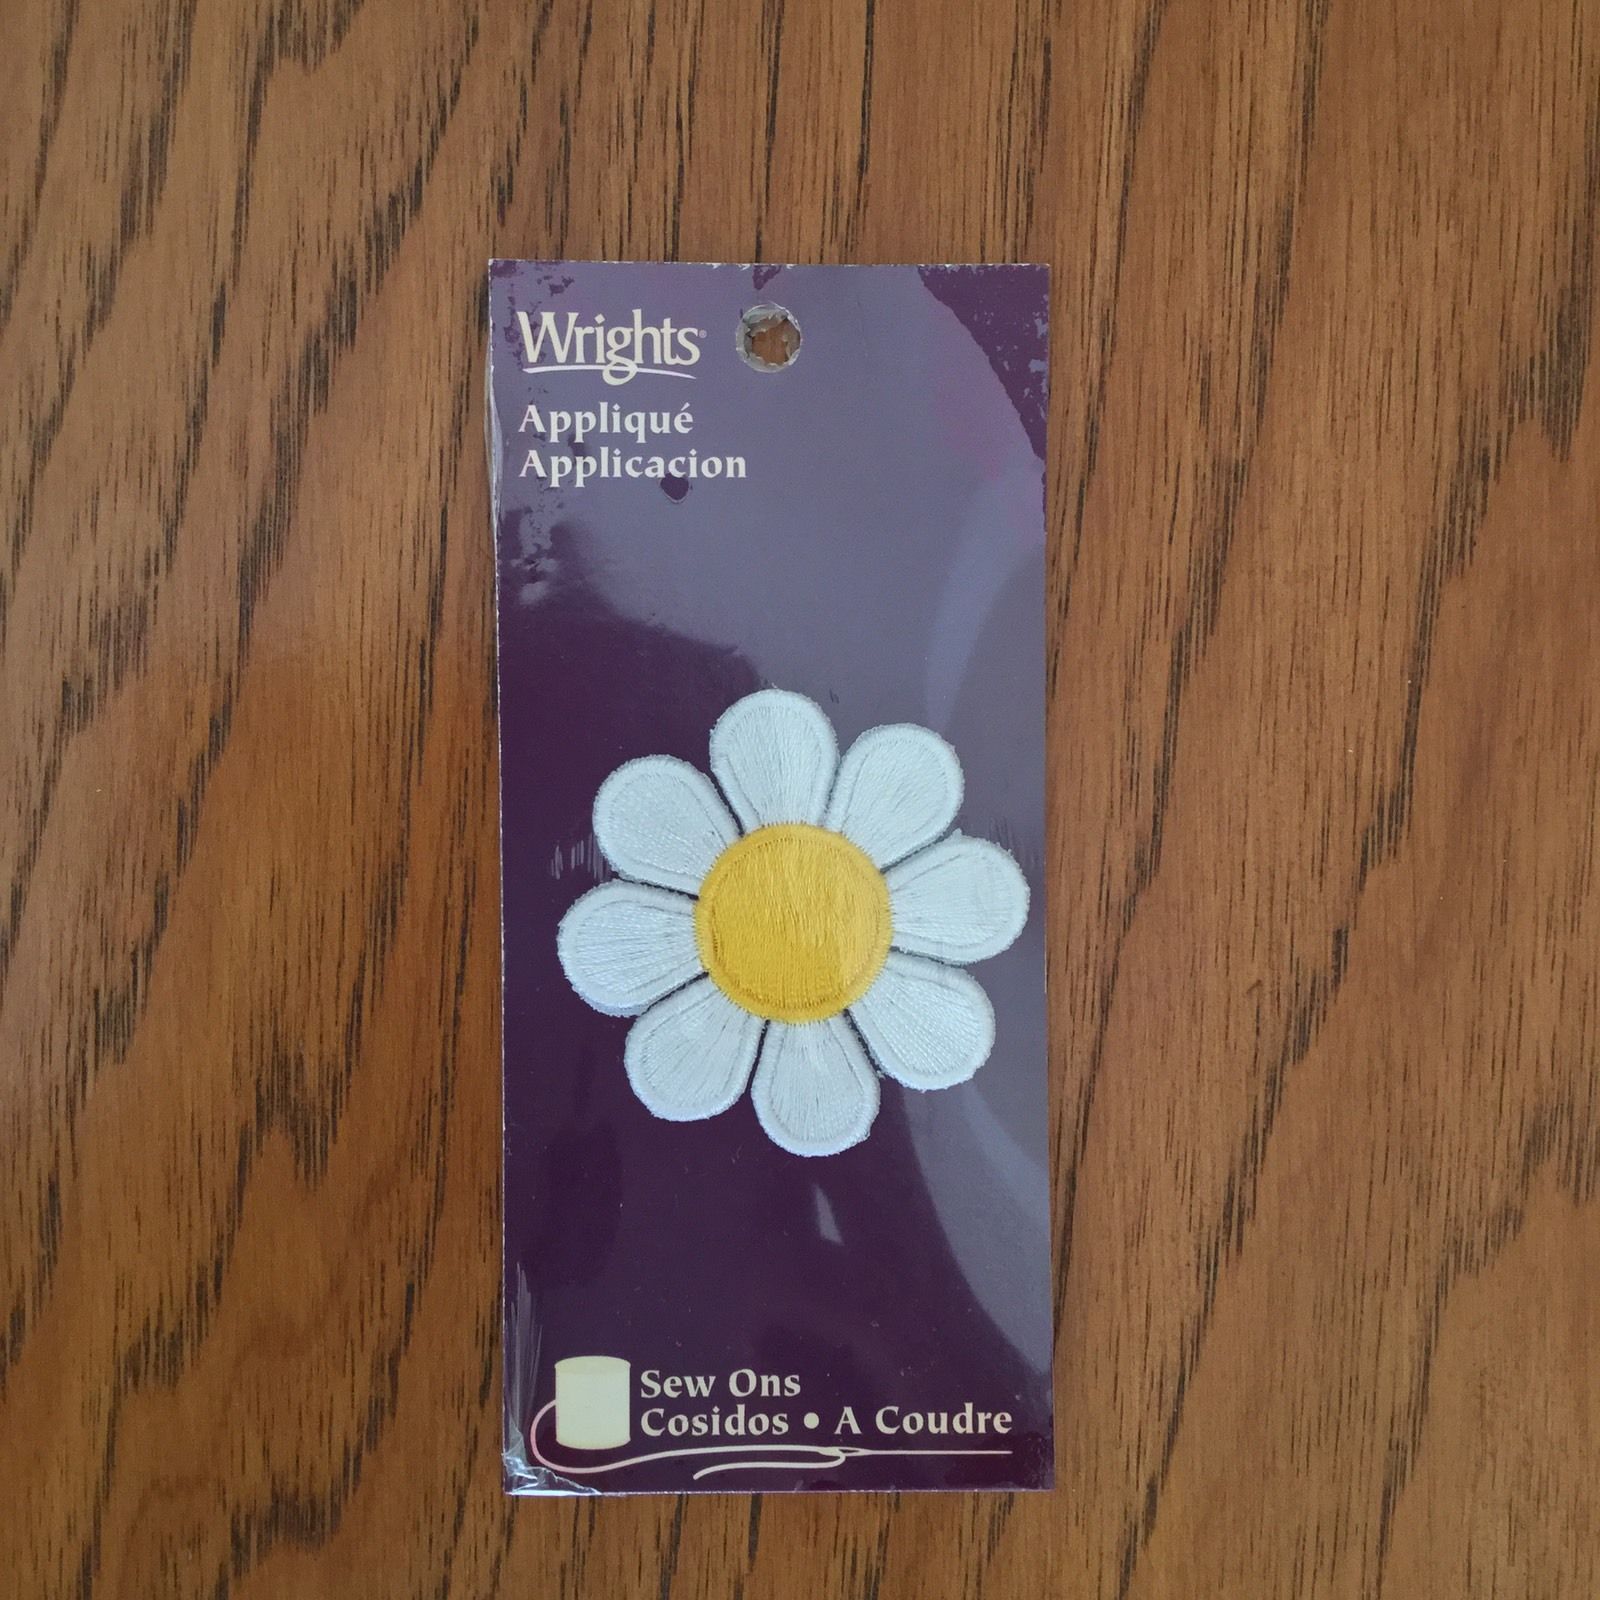 NEW Wrights Iron-On Appliques White Yellow Daisy Flower 1.875"  Item 1967000 - $6.93